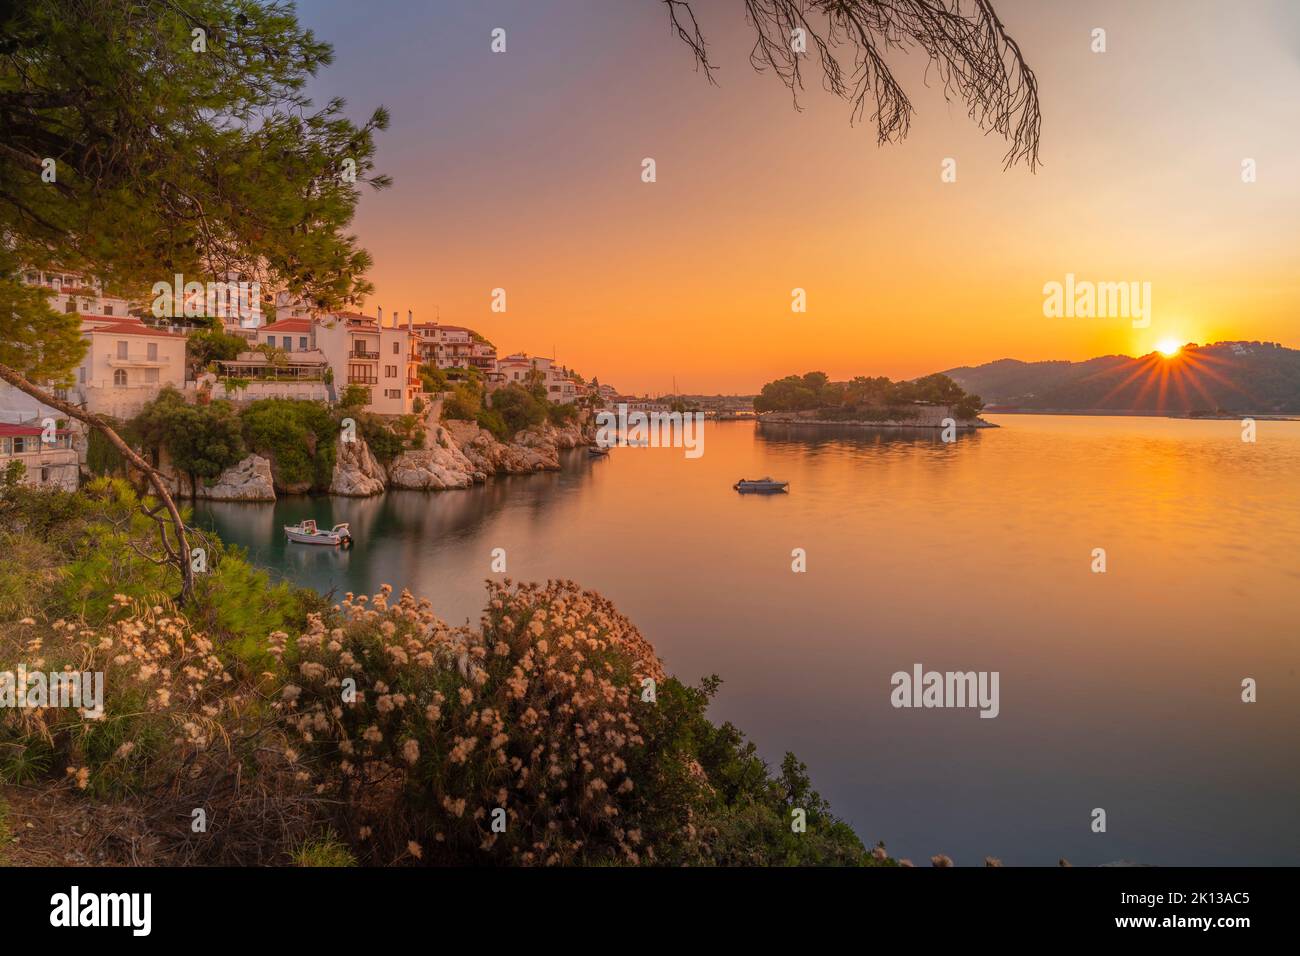 View of old town framed by trees at sunrise, Skiathos Town, Skiathos Island, Sporades Islands, Greek Islands, Greece, Europe Stock Photo